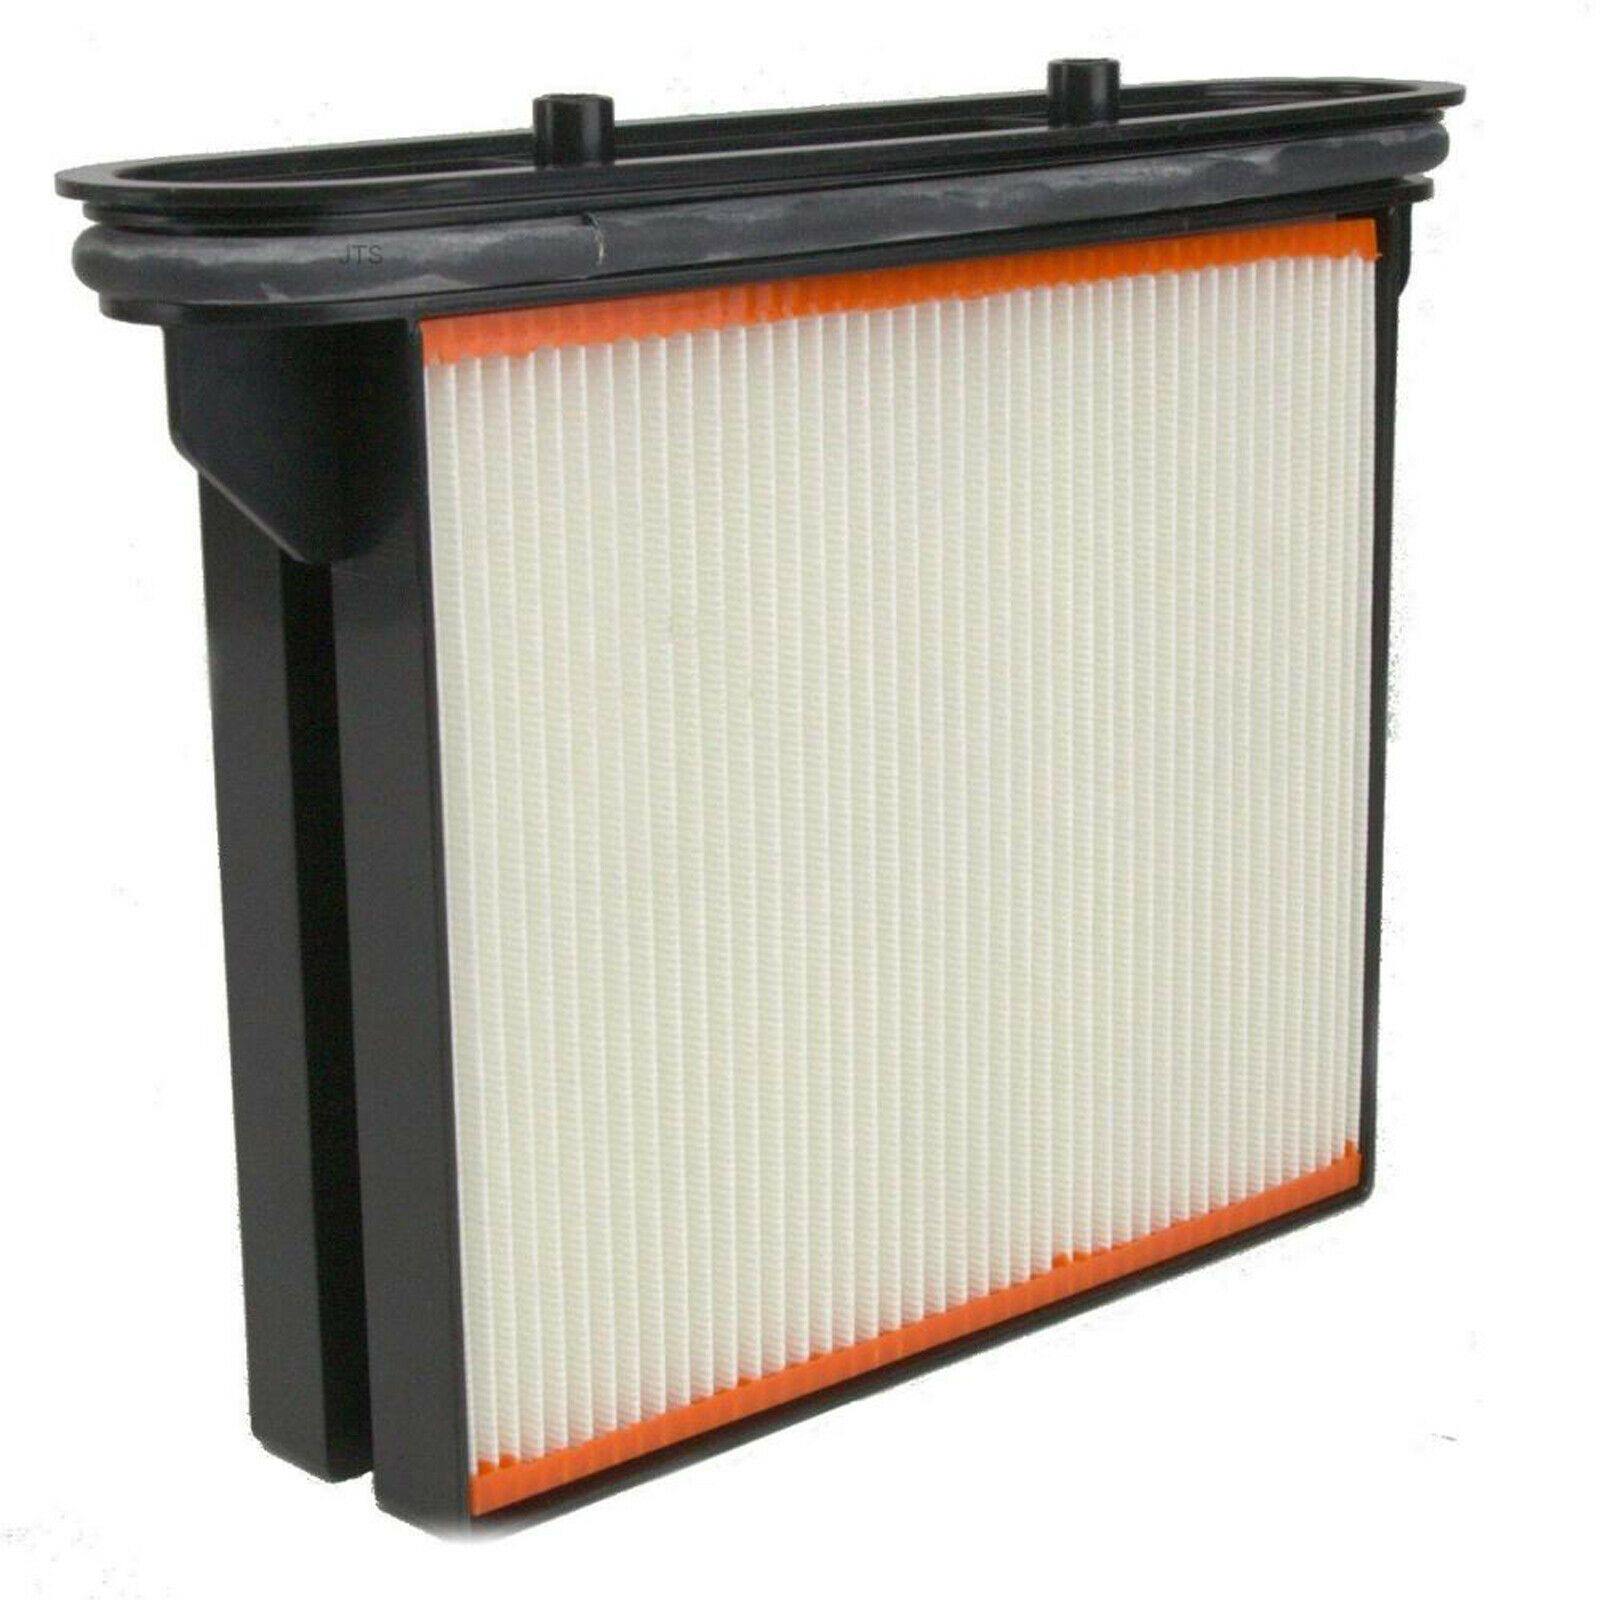 Flat-fold Wet Hepa Filter for Starmix 35L Wet/Dry Extractor IS iPulse ARM-1435 Sparesbarn